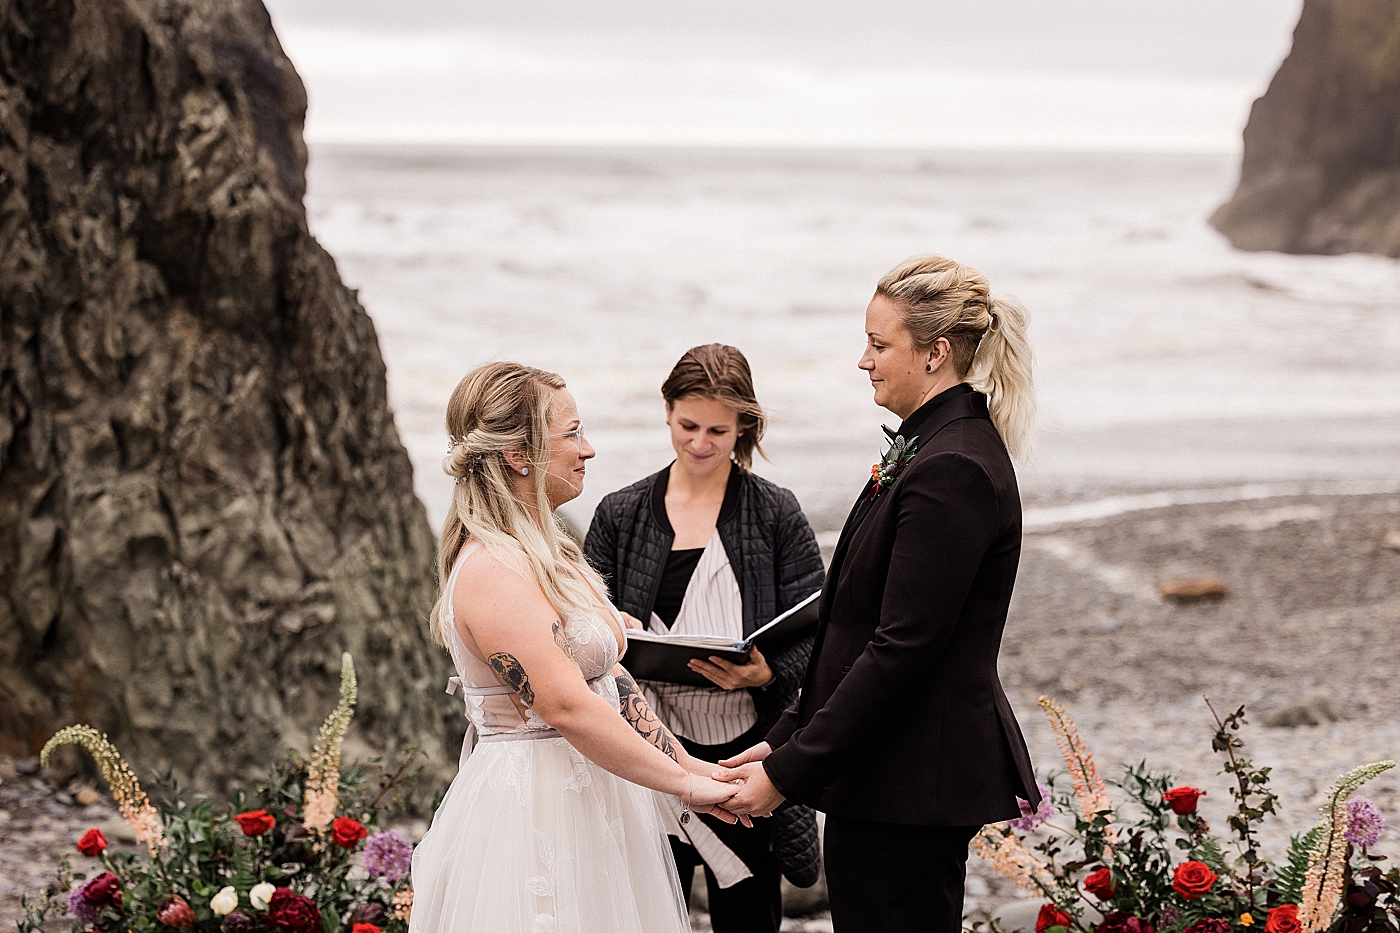 Elopement ceremony at Ruby Beach | Photo by Megan Montalvo Photography